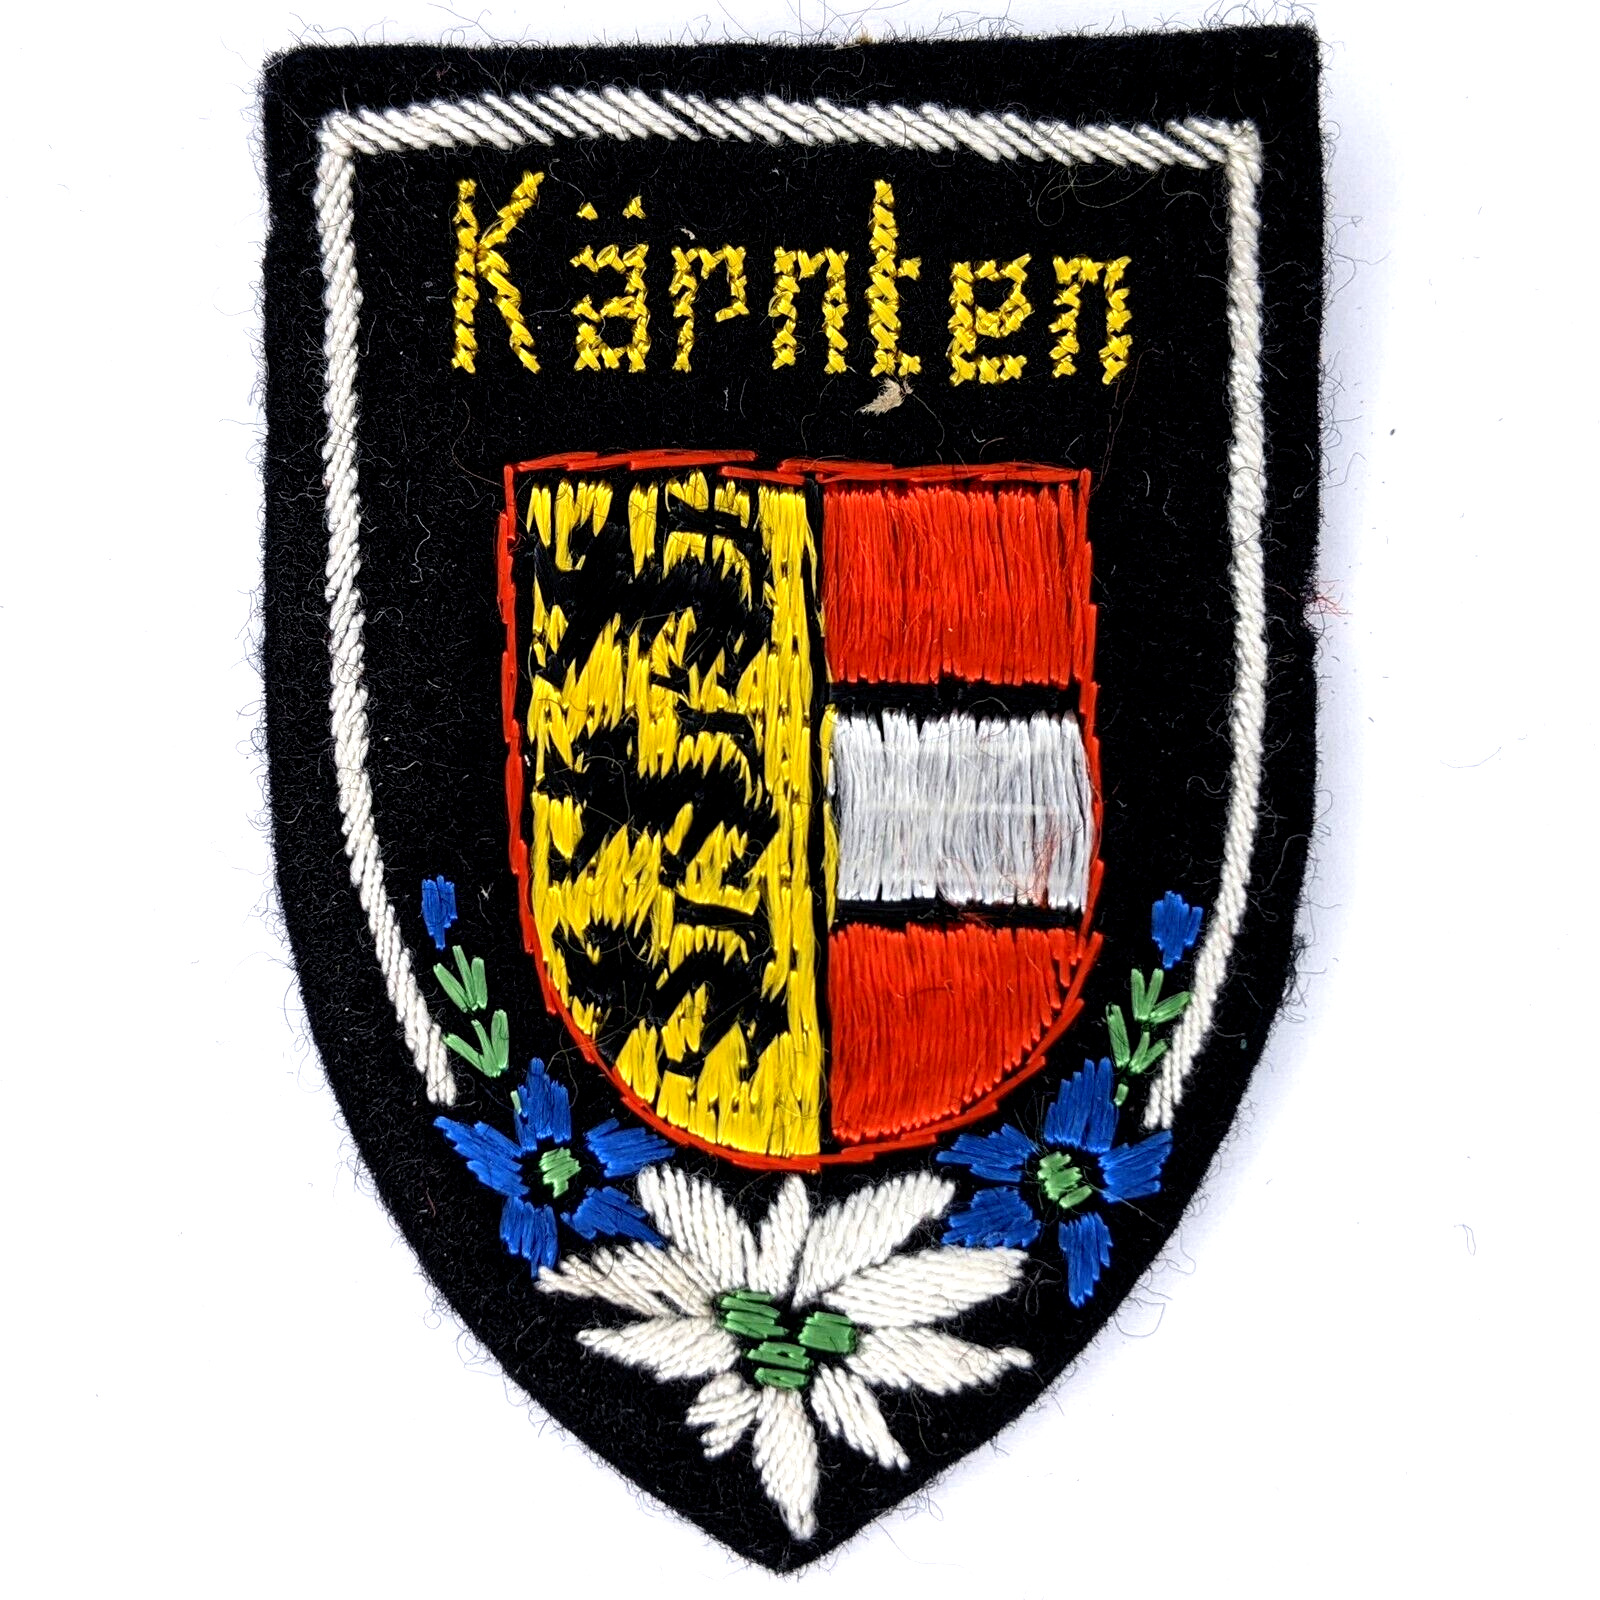 Karnten Carinthia, Austria State Coat of Arms Black Cloth Patch Embroidered C38